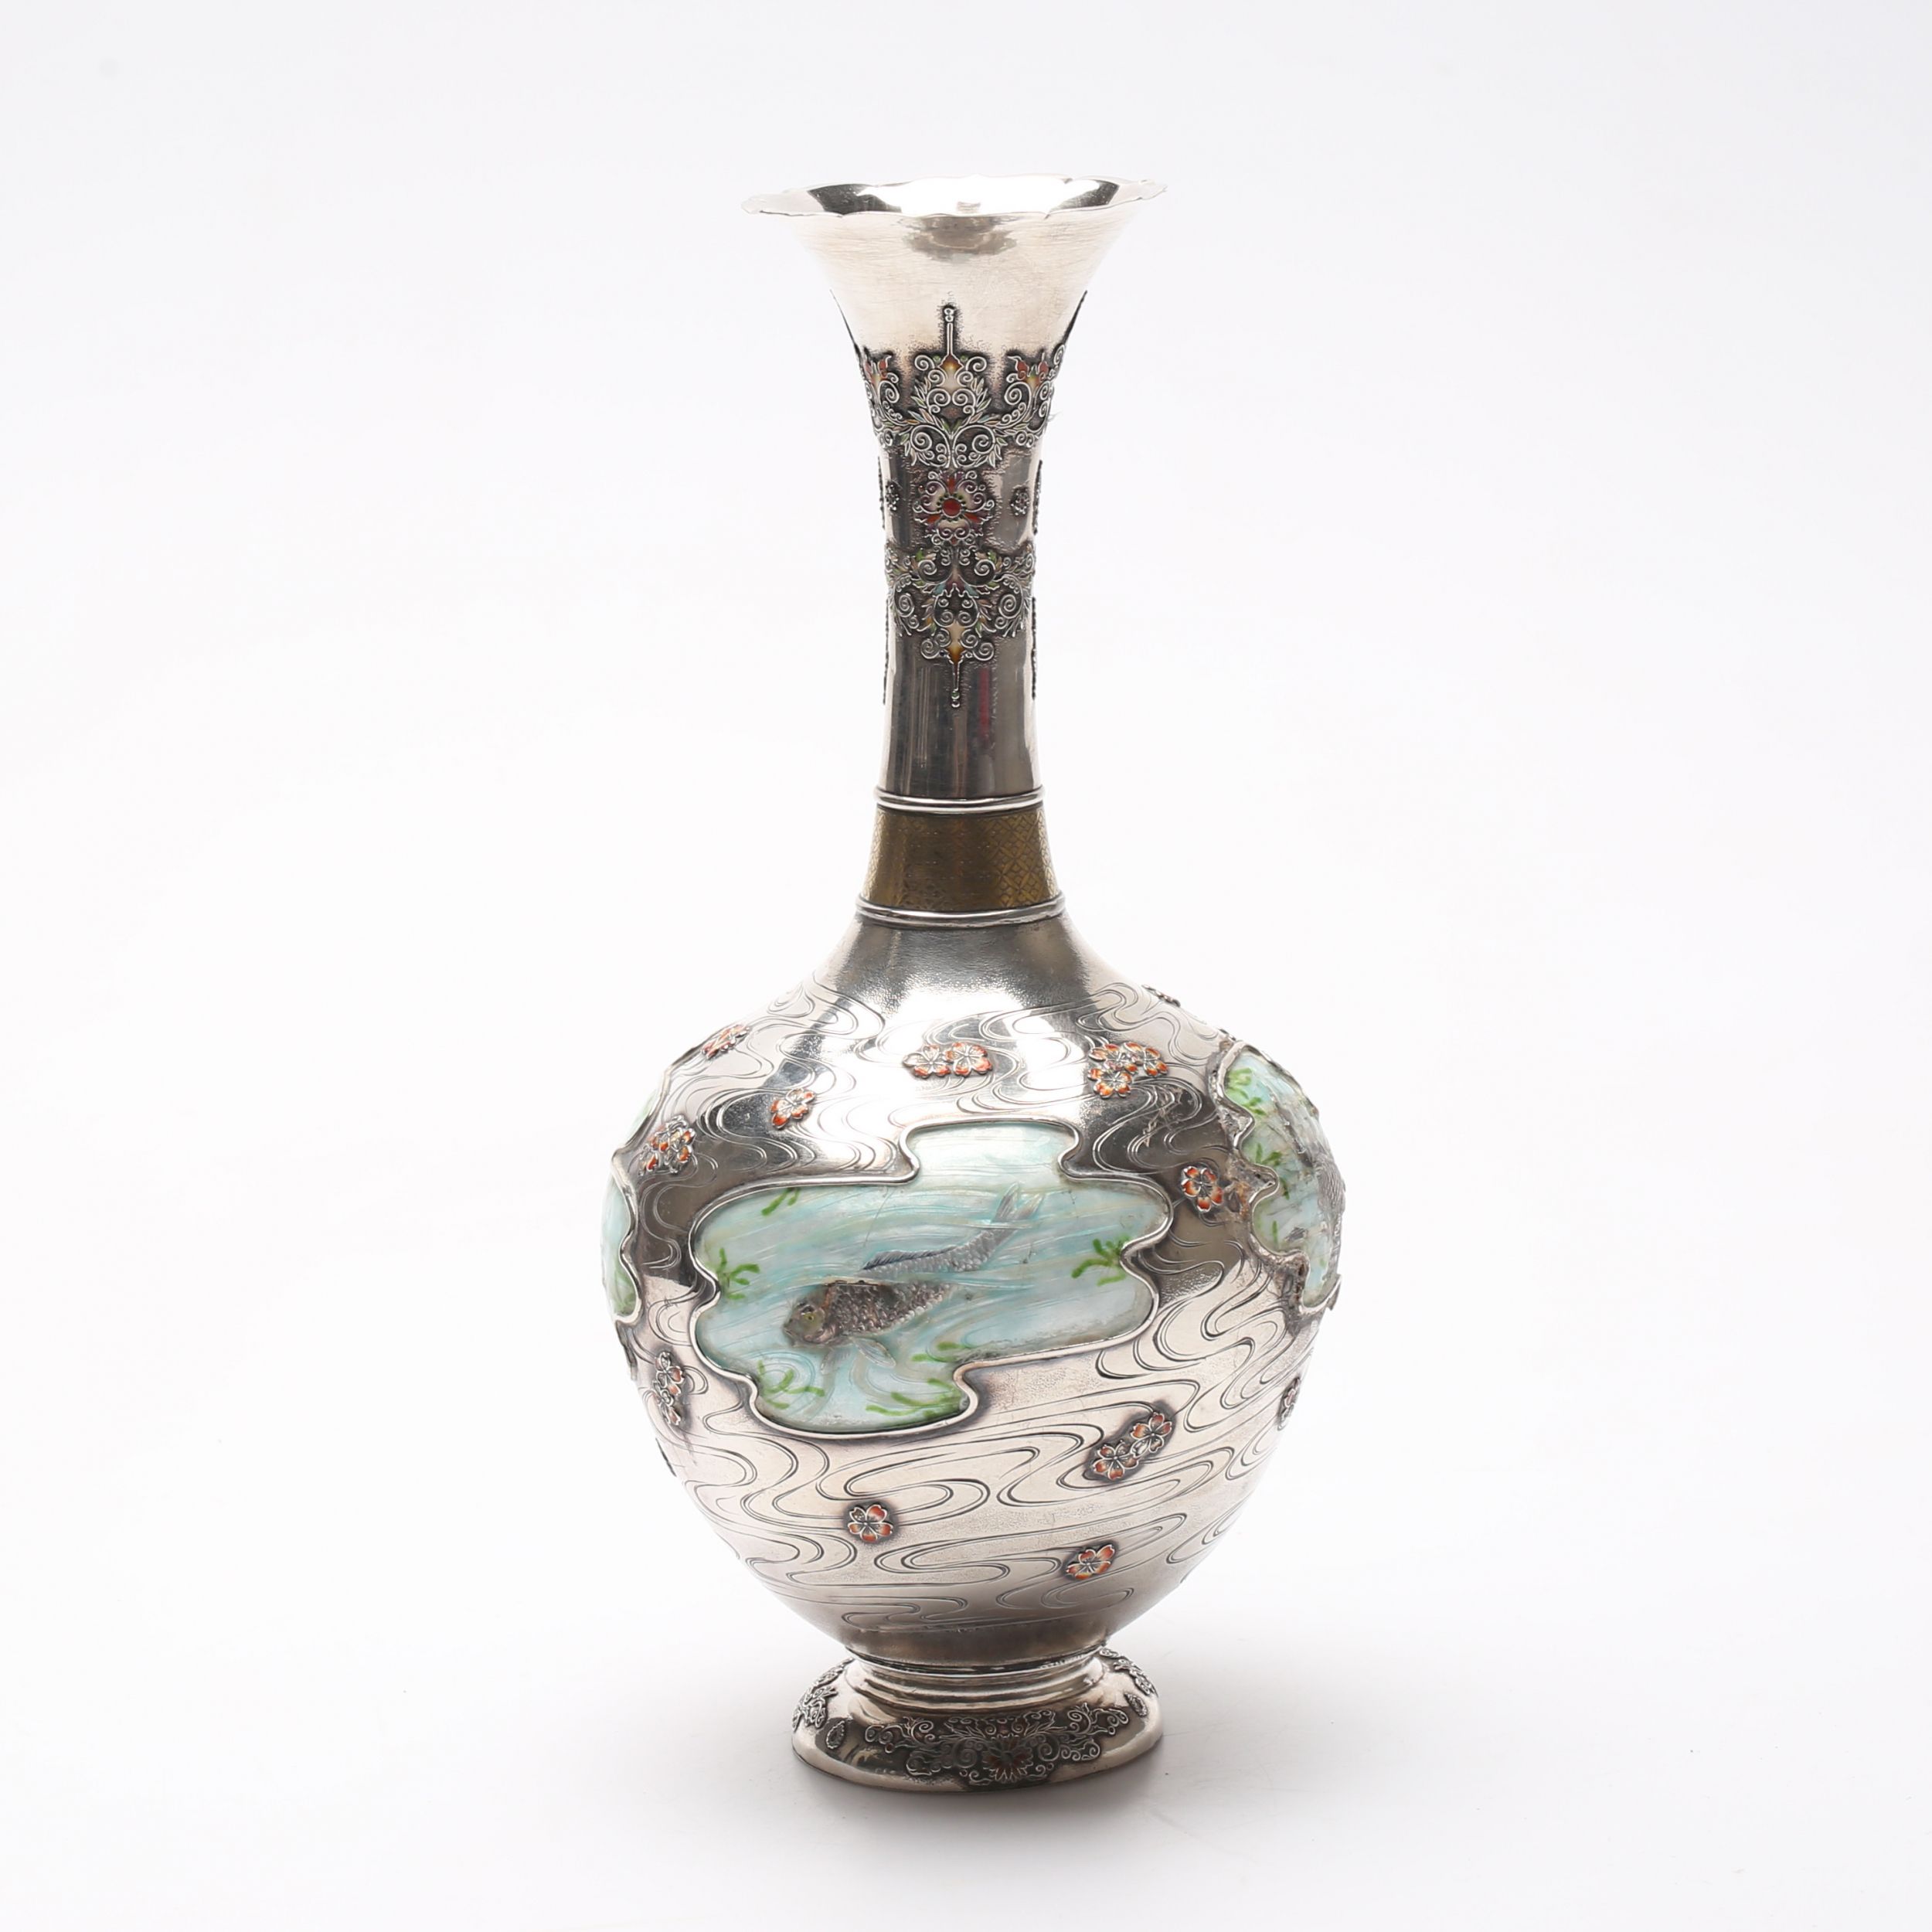 Silver-vase-with-enamel-from-the-Meiji-period-1868---1912-Japan-